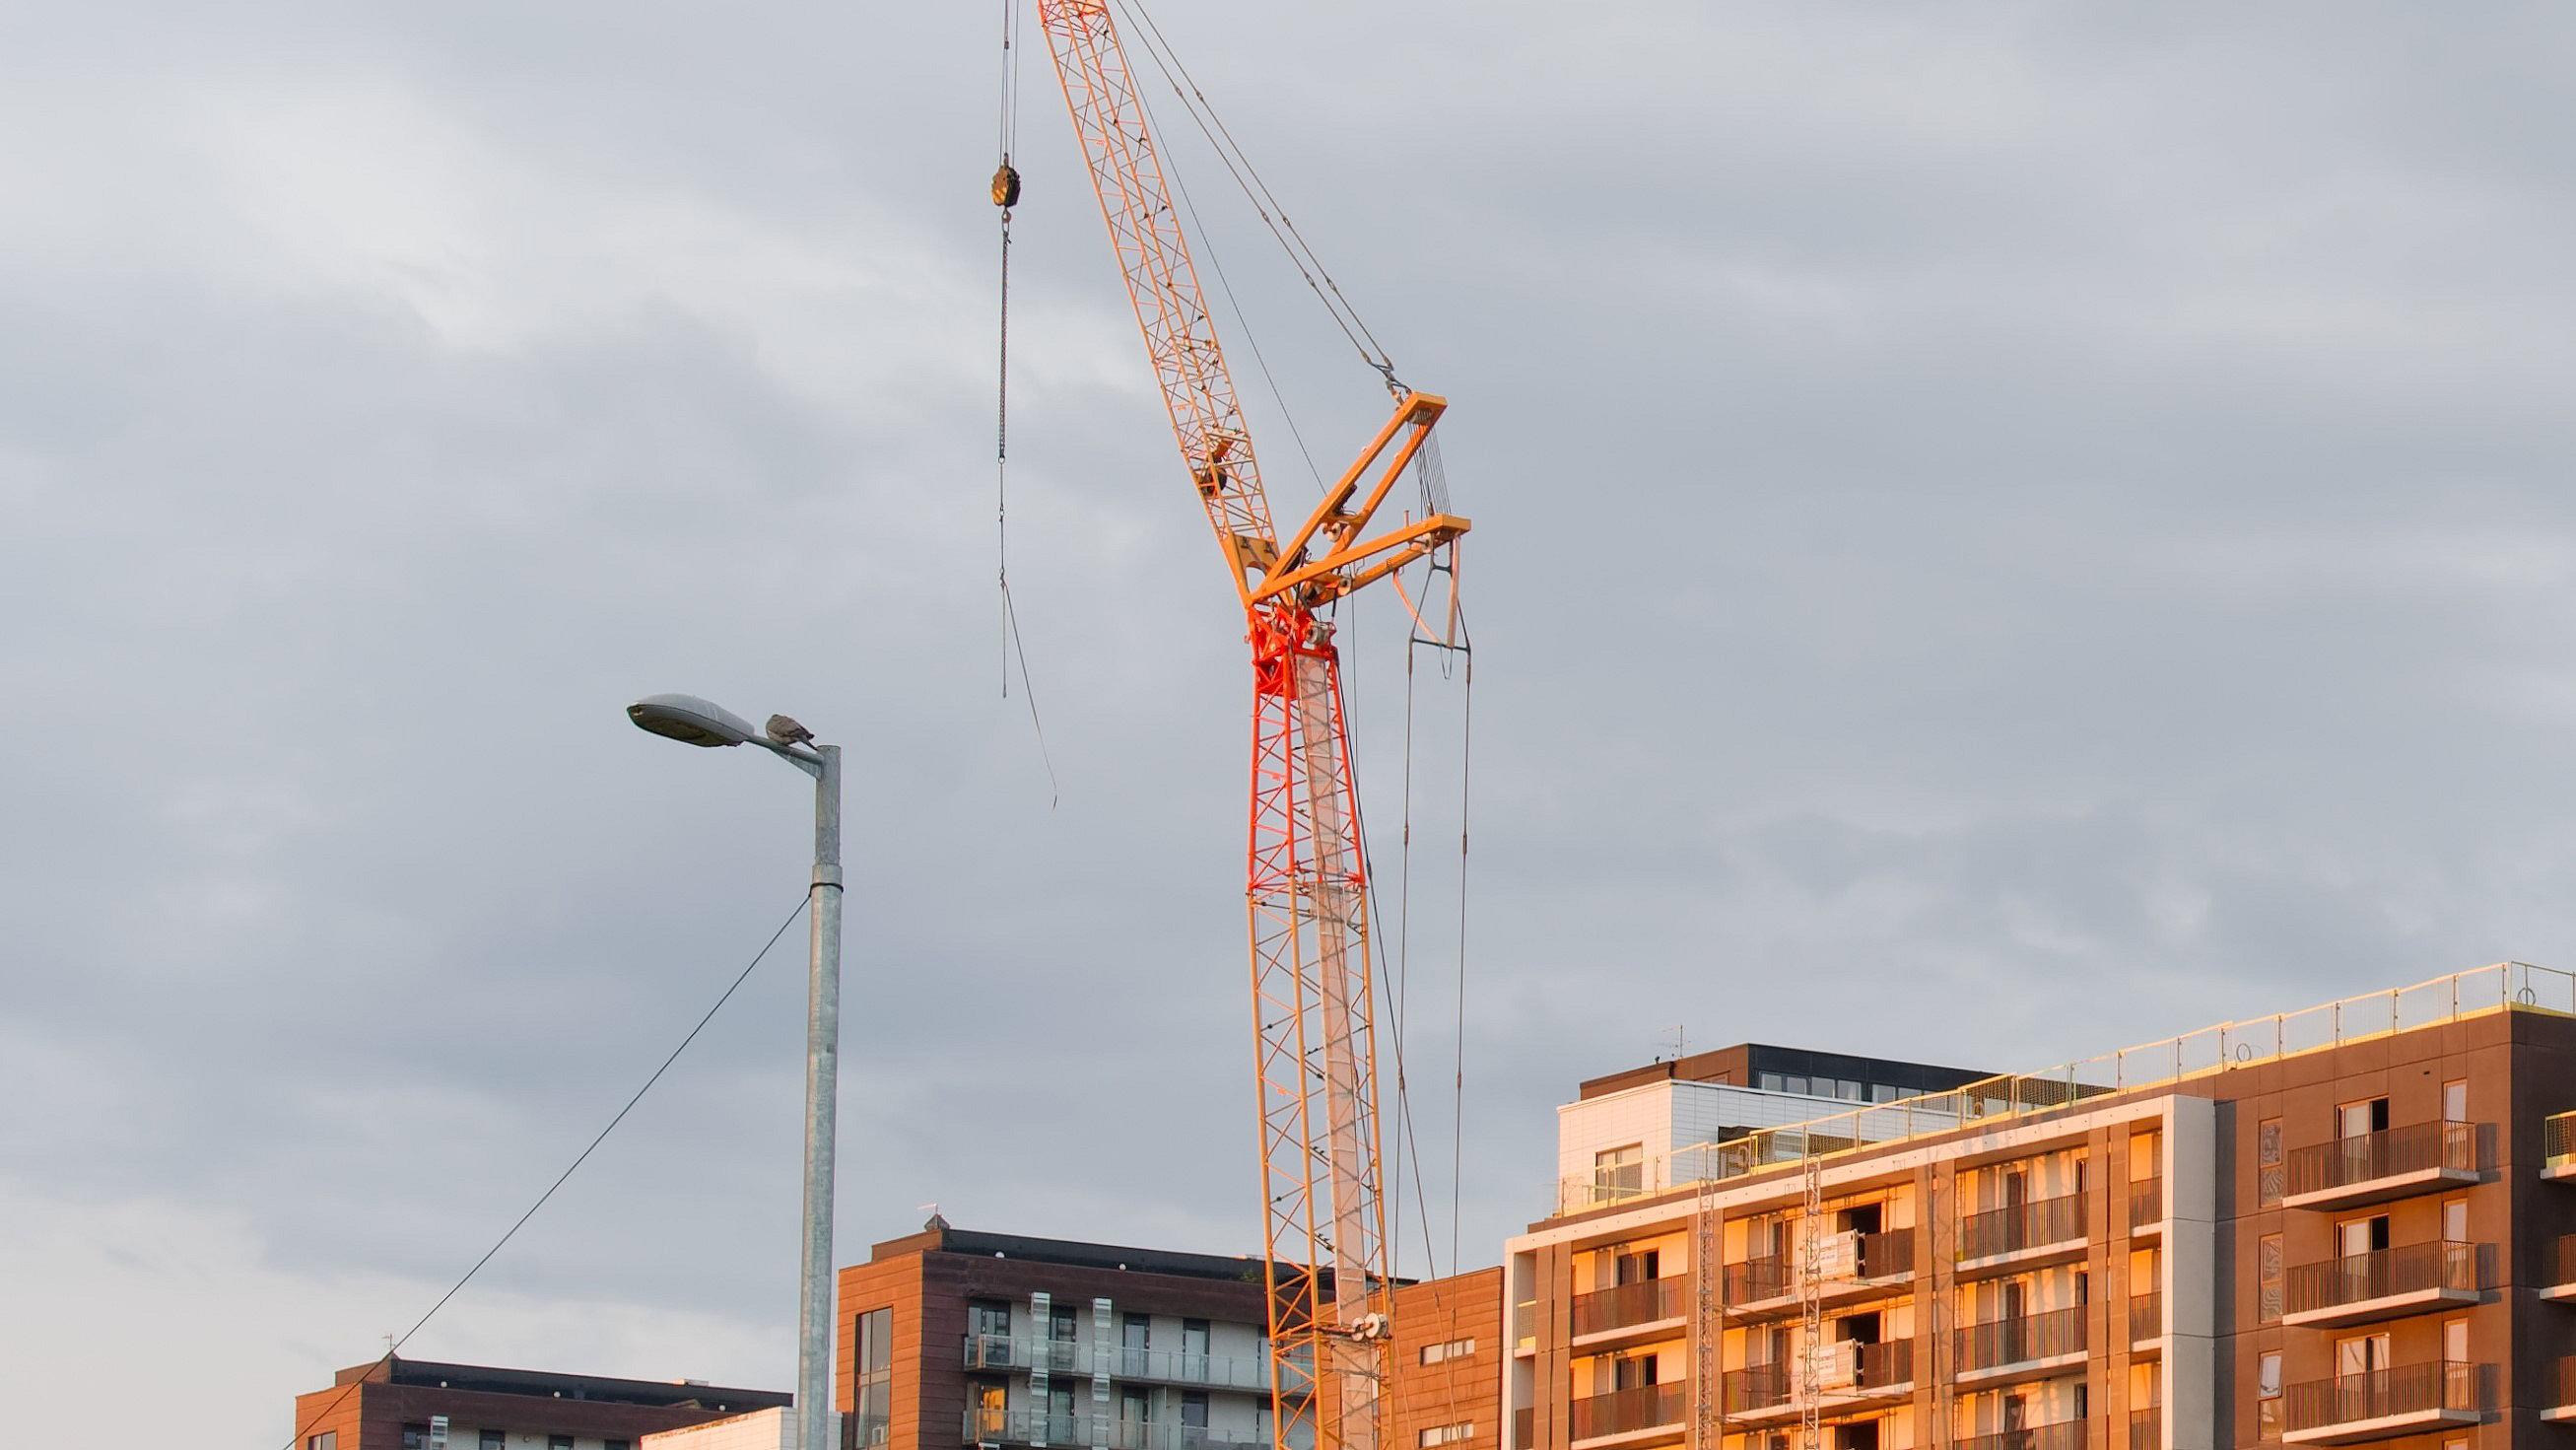 Crane in front of flats